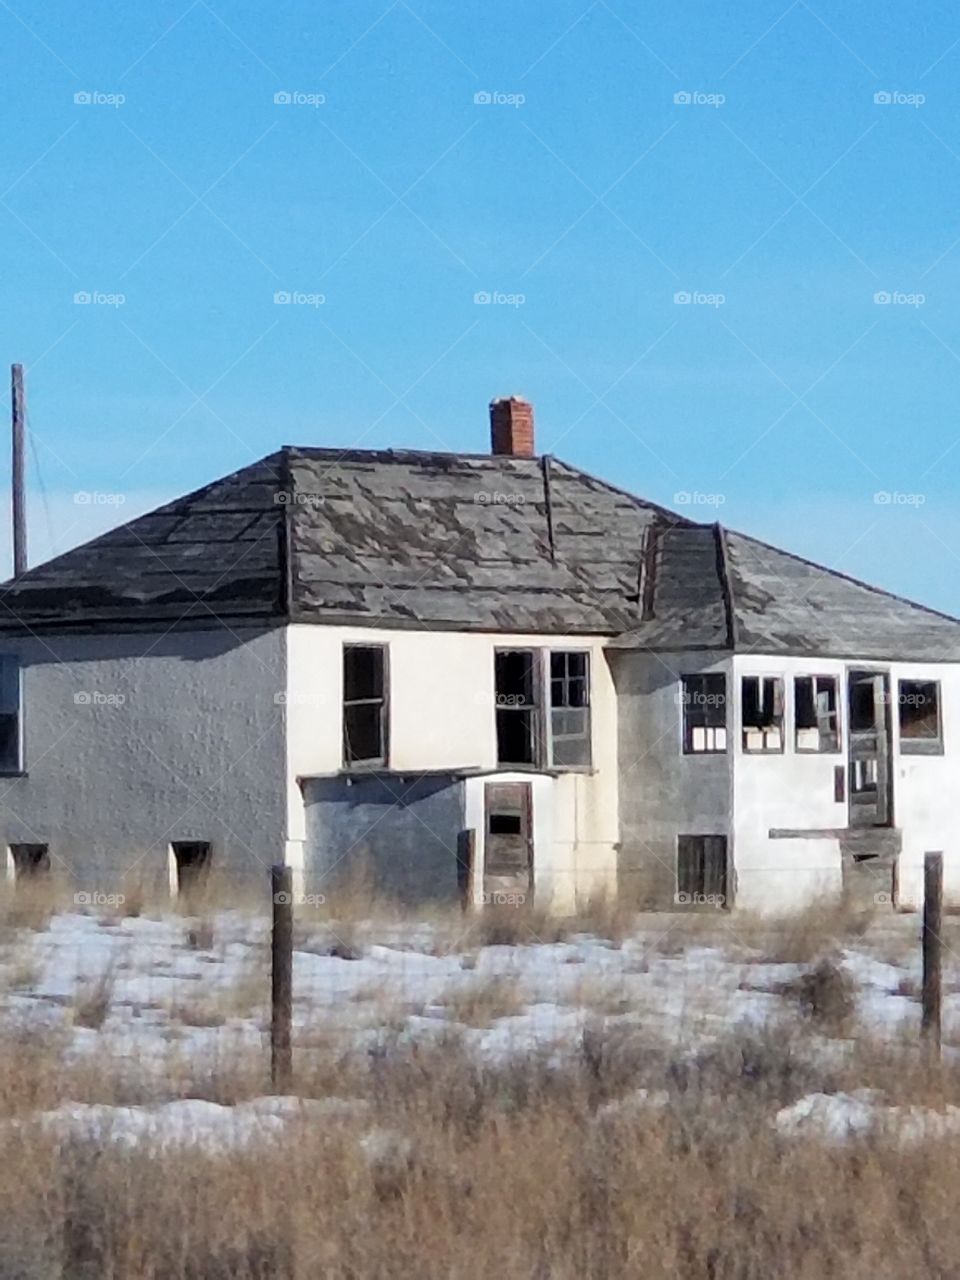 abandoned house in Wyoming